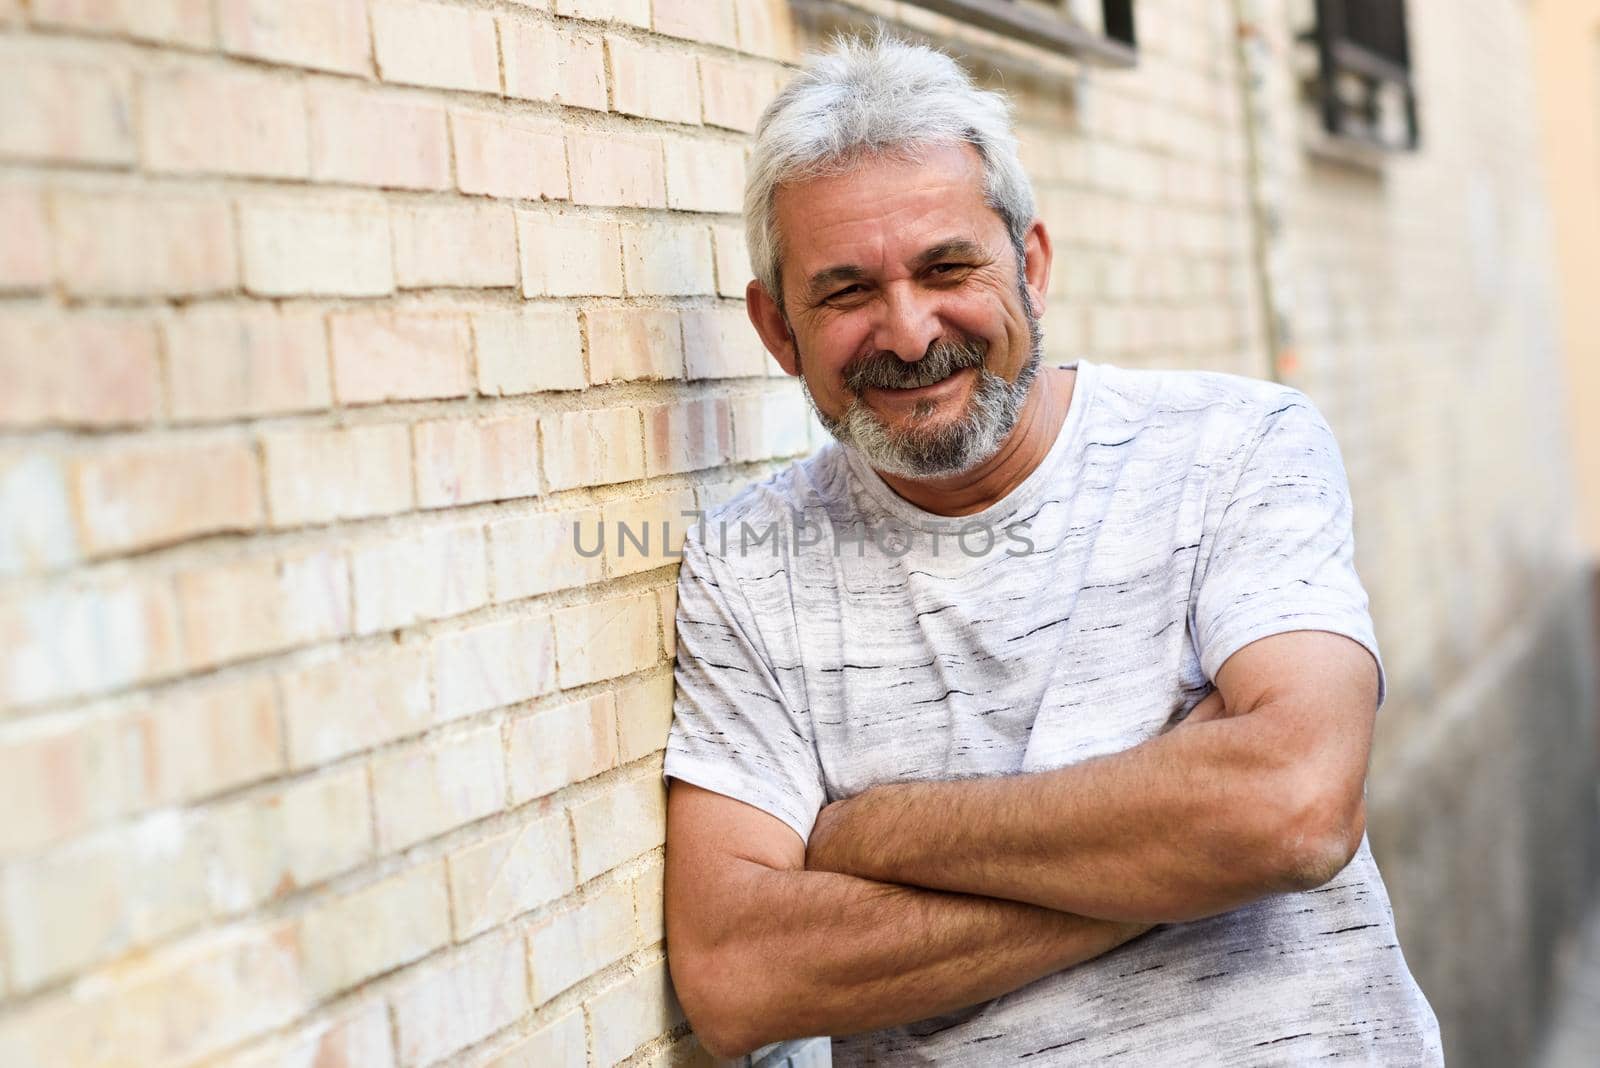 Mature man smiling at camera in urban background. Senior male with white hair and beard wearing casual clothes.